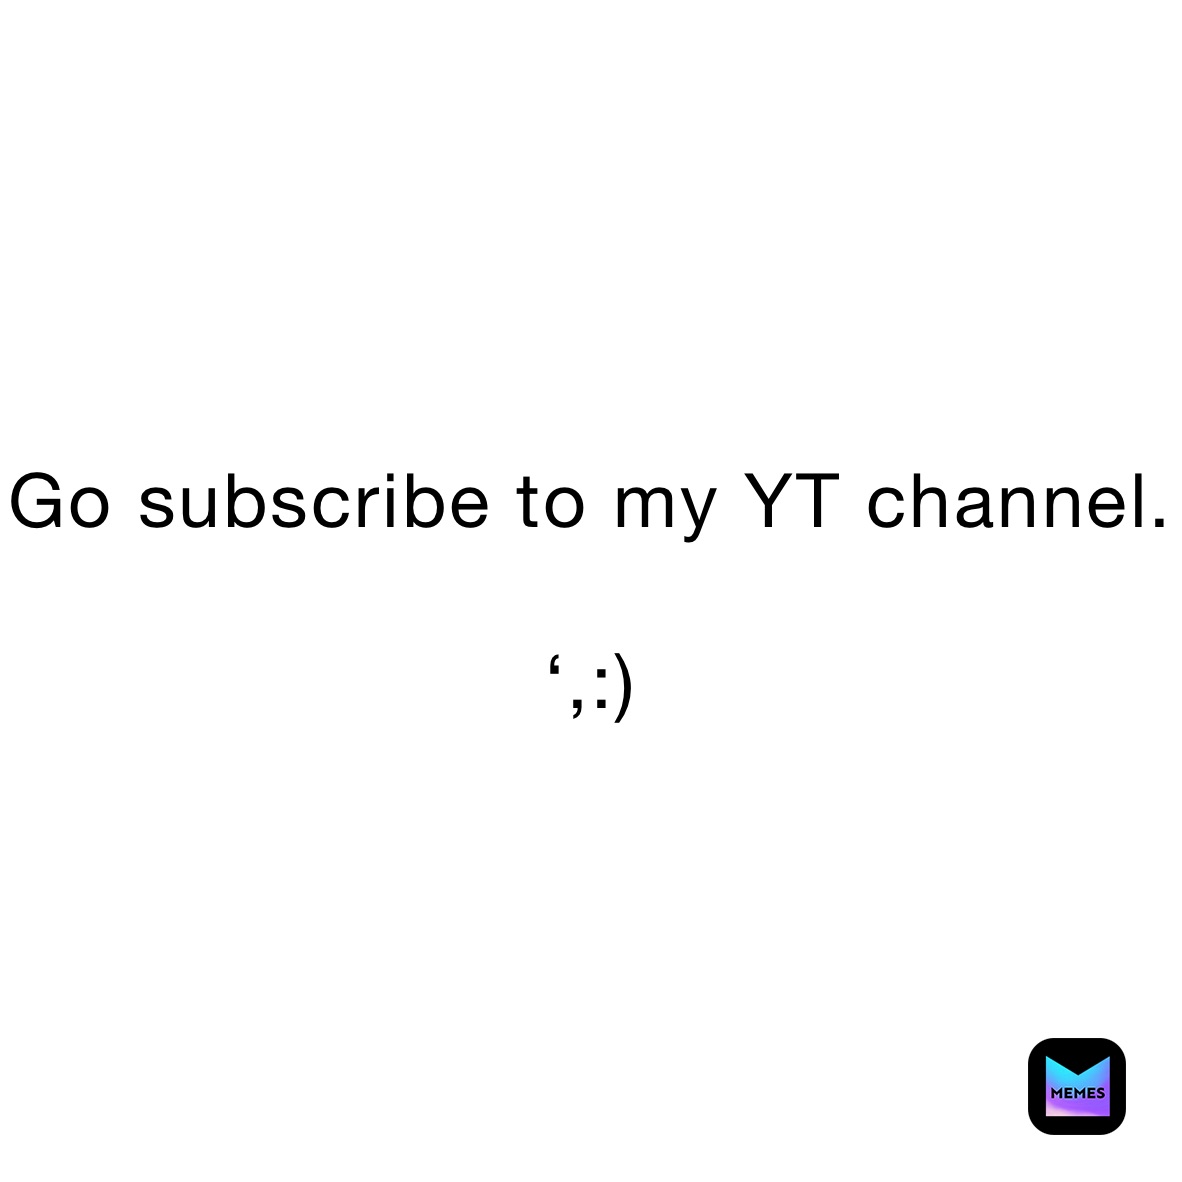 Go subscribe to my YT channel. 

‘,:)